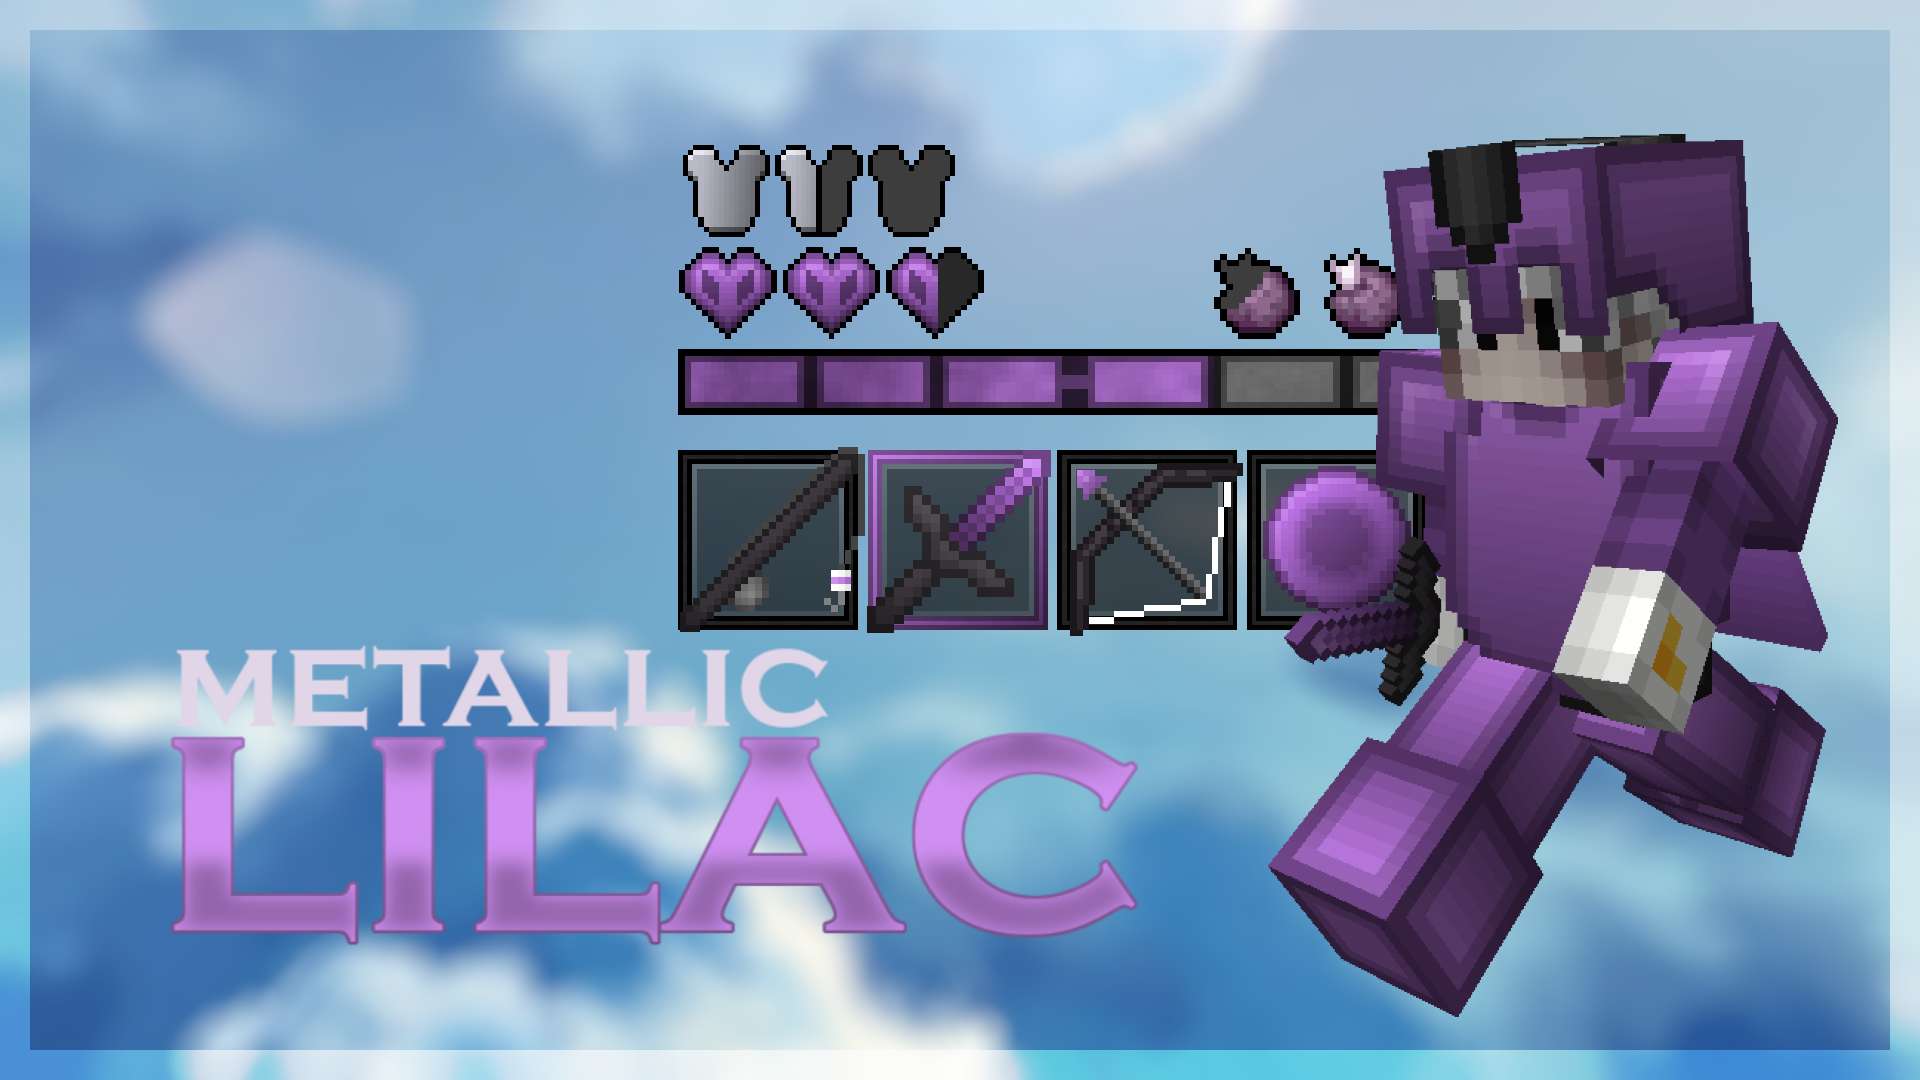 metallic lilac 32 by CyberFUnction on PvPRP